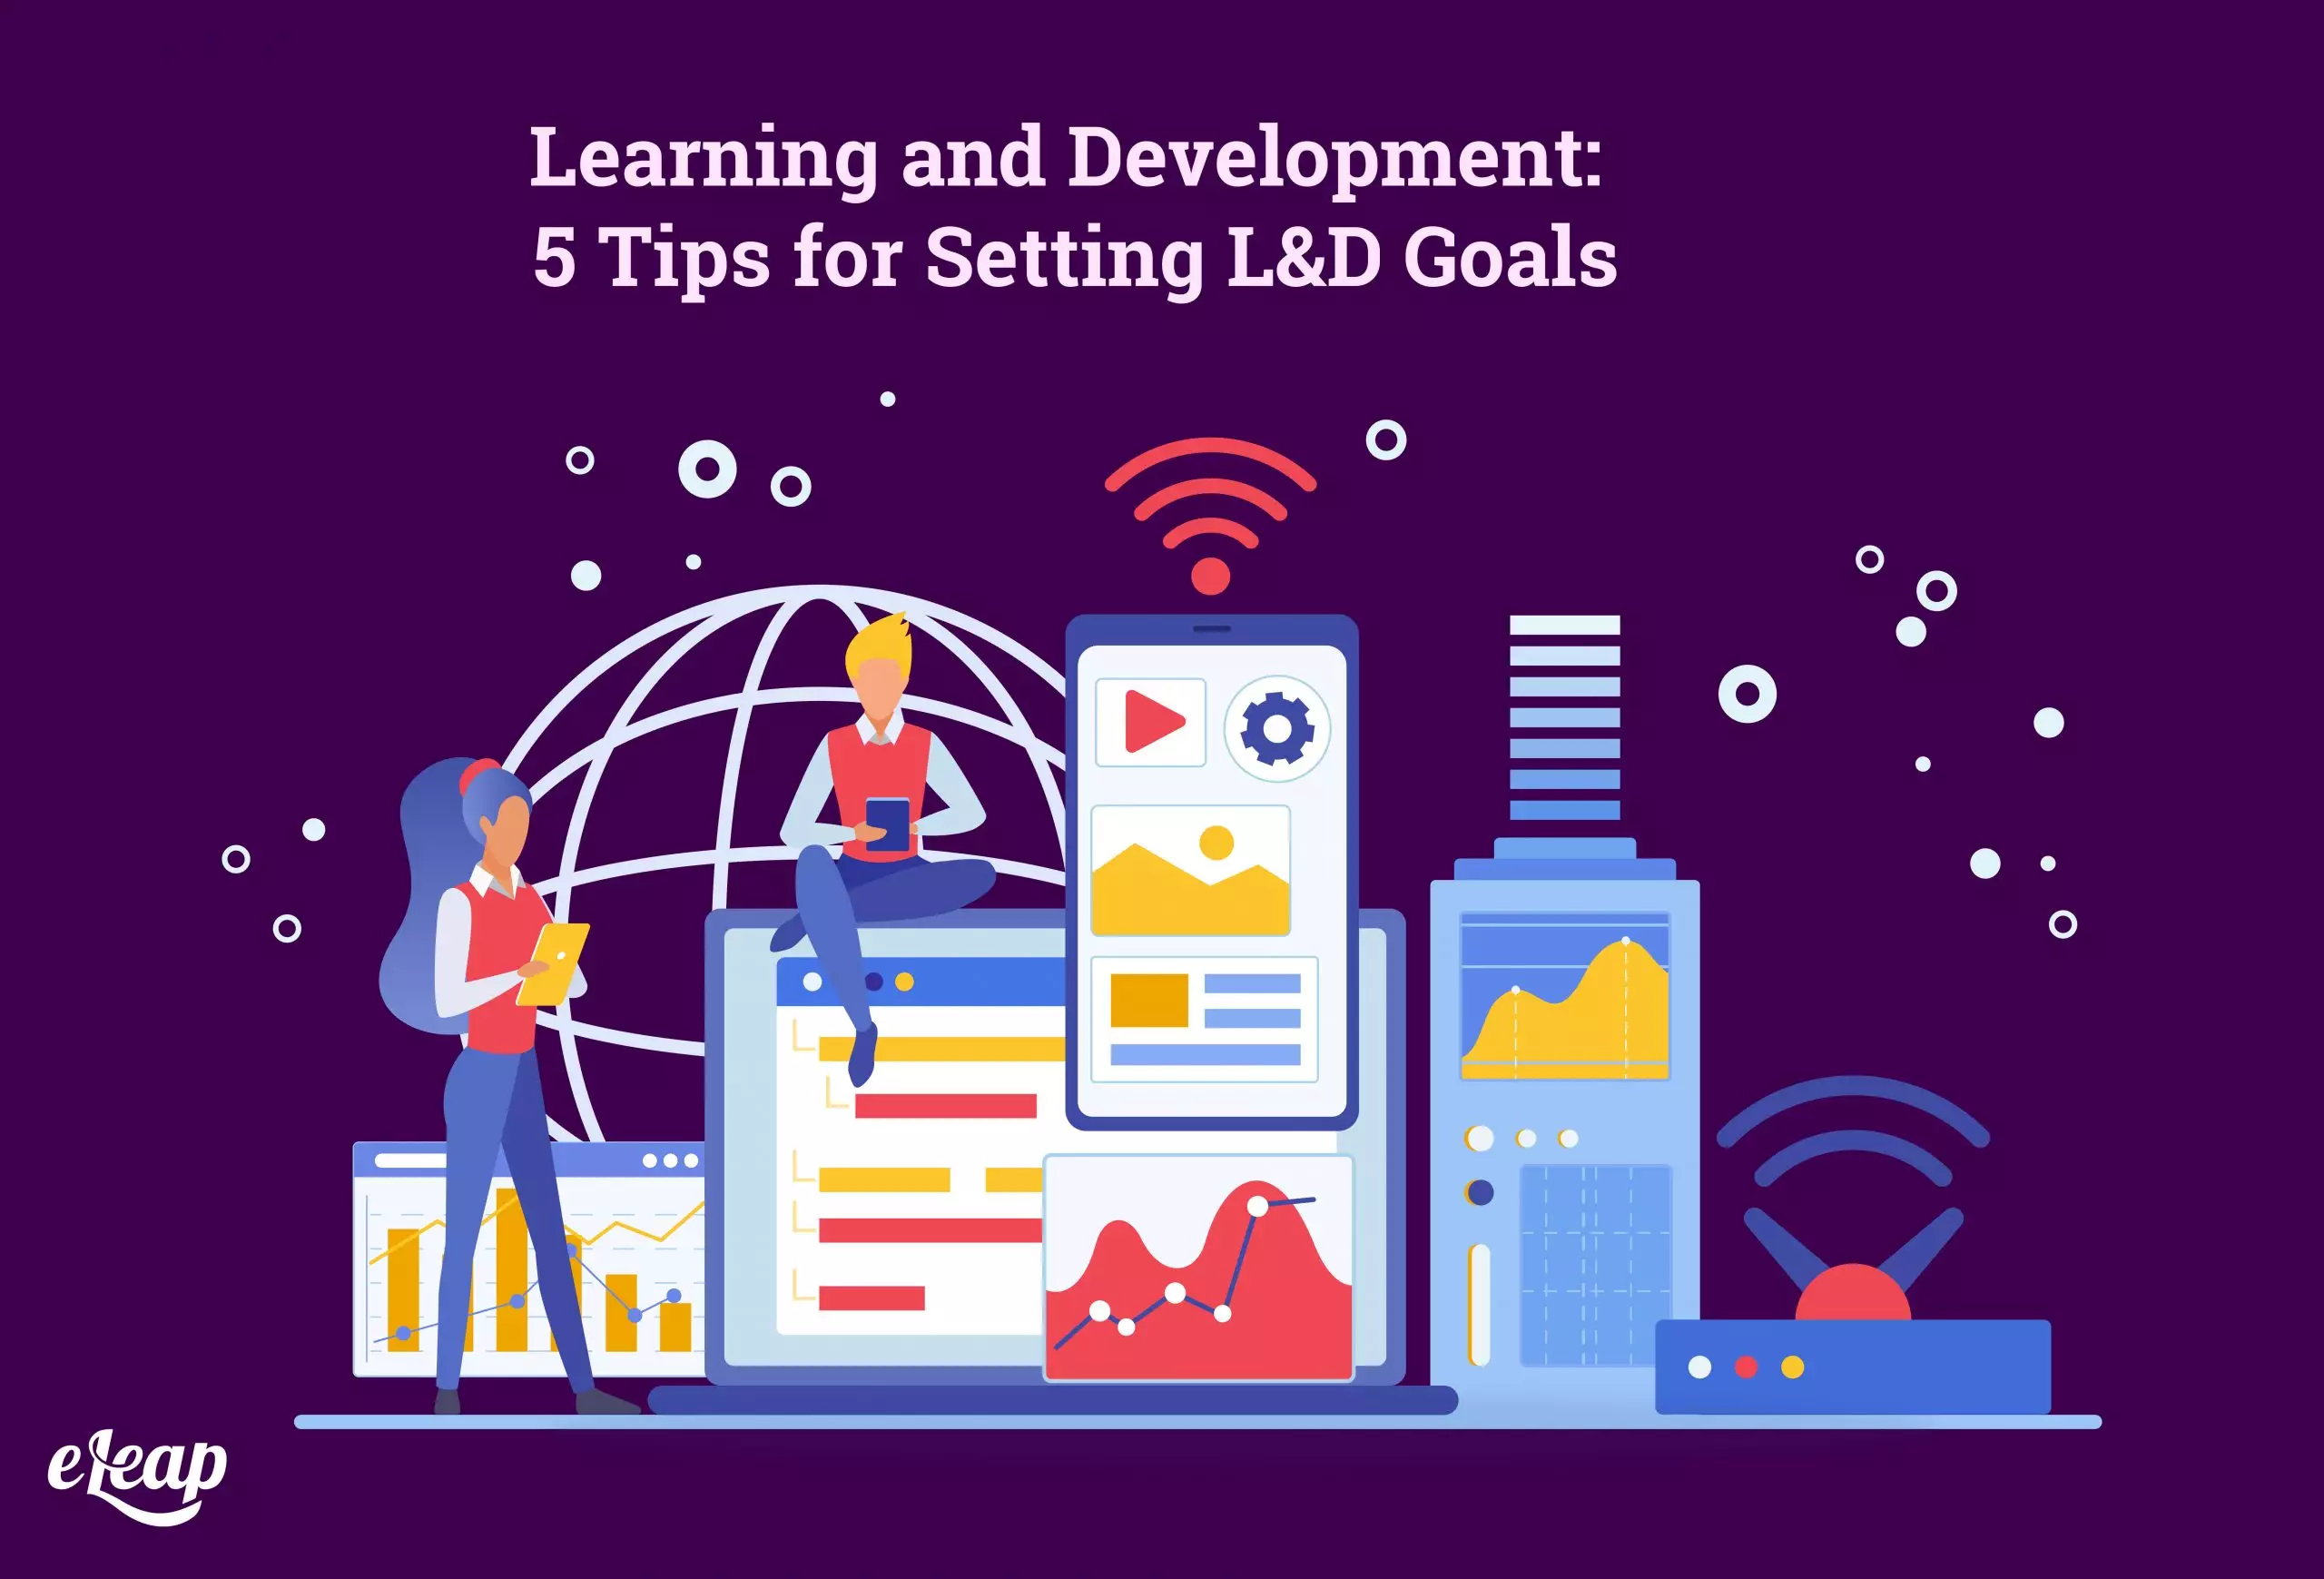 Learning and Development: 5 Tips for Setting L&D Goals